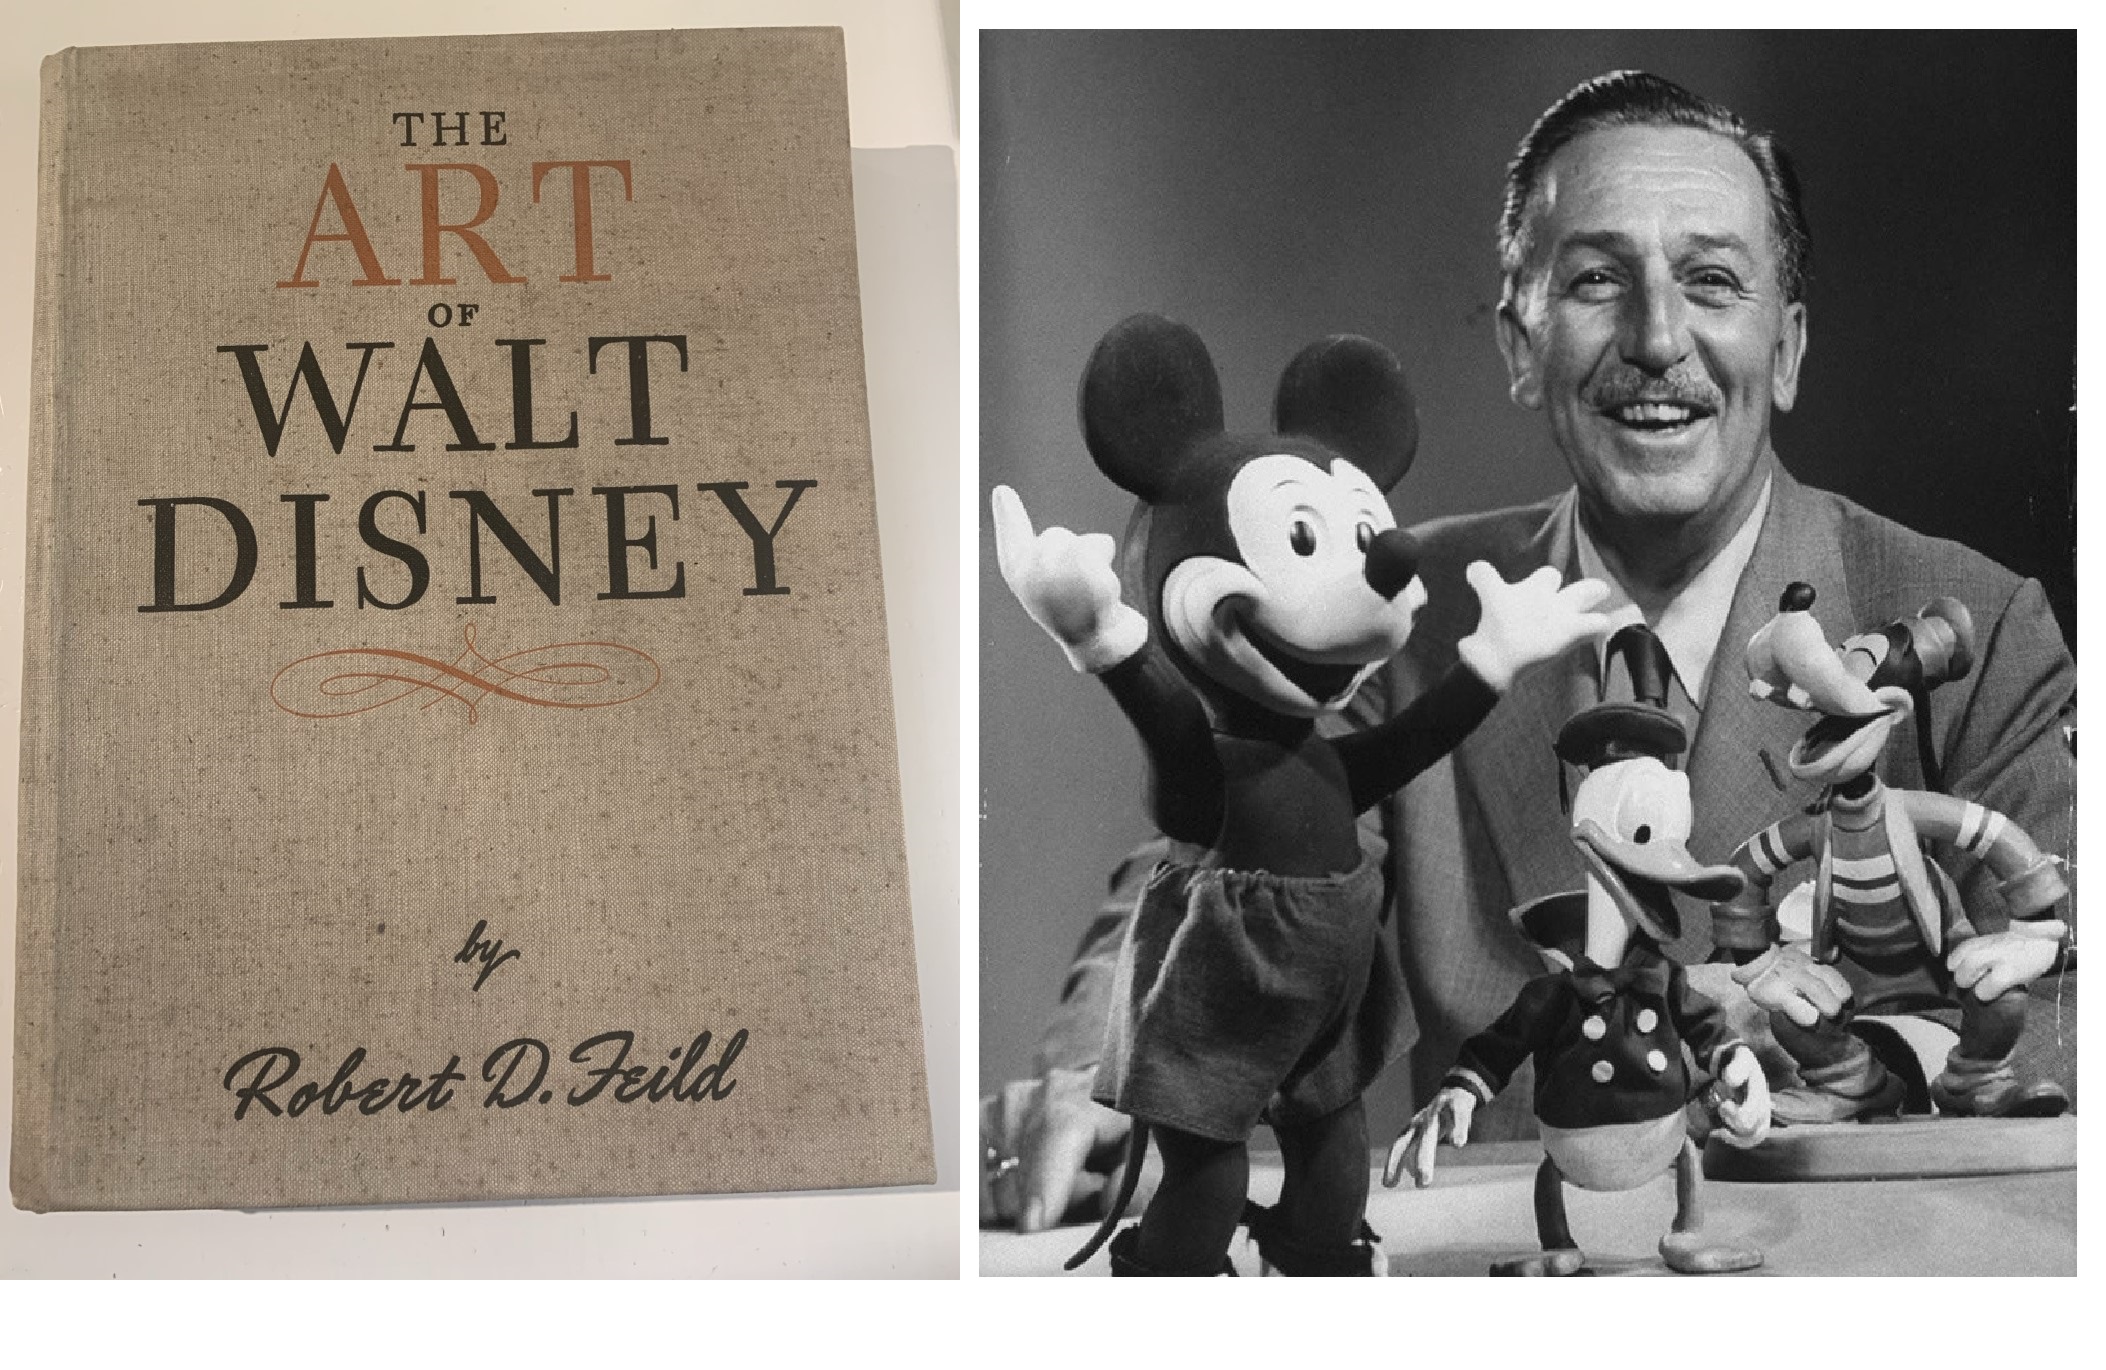 FIRST EDITION OF THE ART OF WALT DISNEY BOOK 1942 INSCRIBED BY